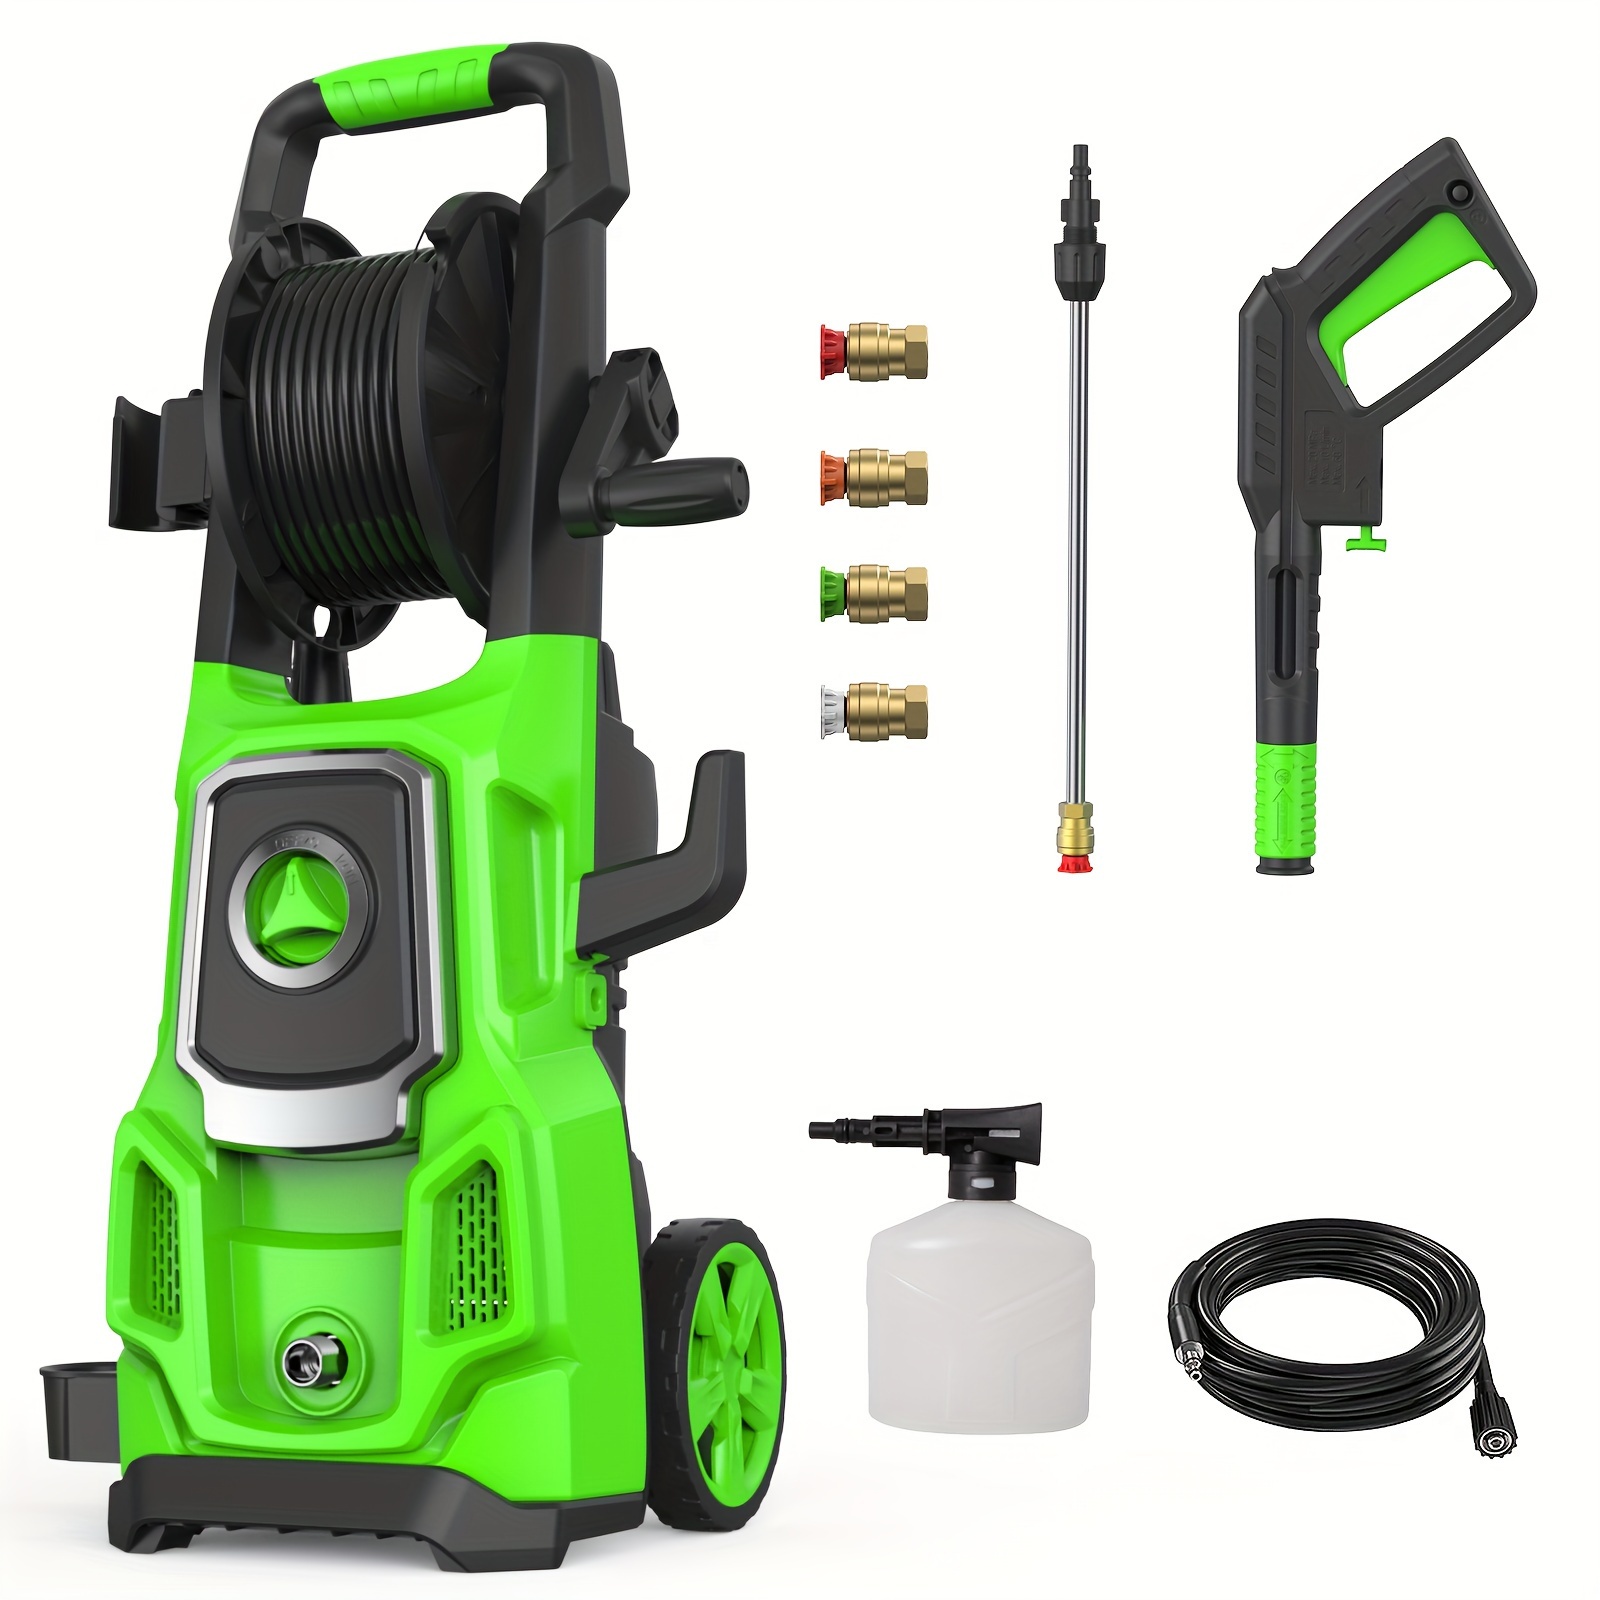 

Electric Pressure Washer, 3500 Max Psi, 2.6 Gpm Power Washer Machine With Hose Reel, 4 Quick-connect Nozzles, Foam Cannon For Car/patio/driveways Cleaning